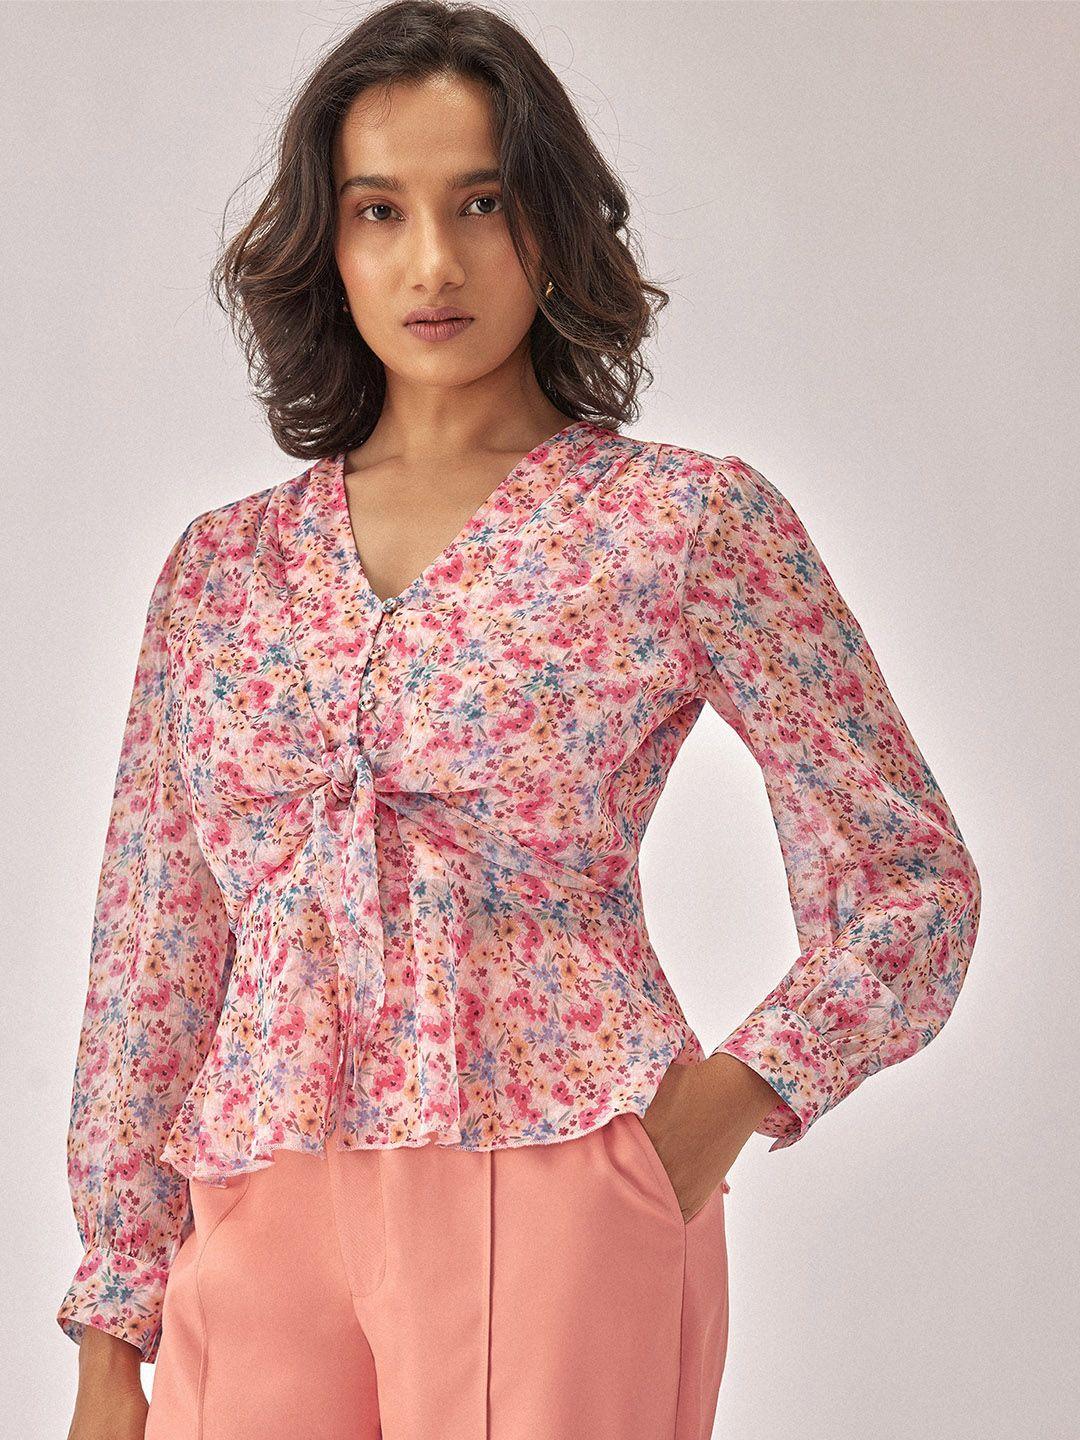 the-label-life-pink-floral-print-chiffon-cinched-waist-top